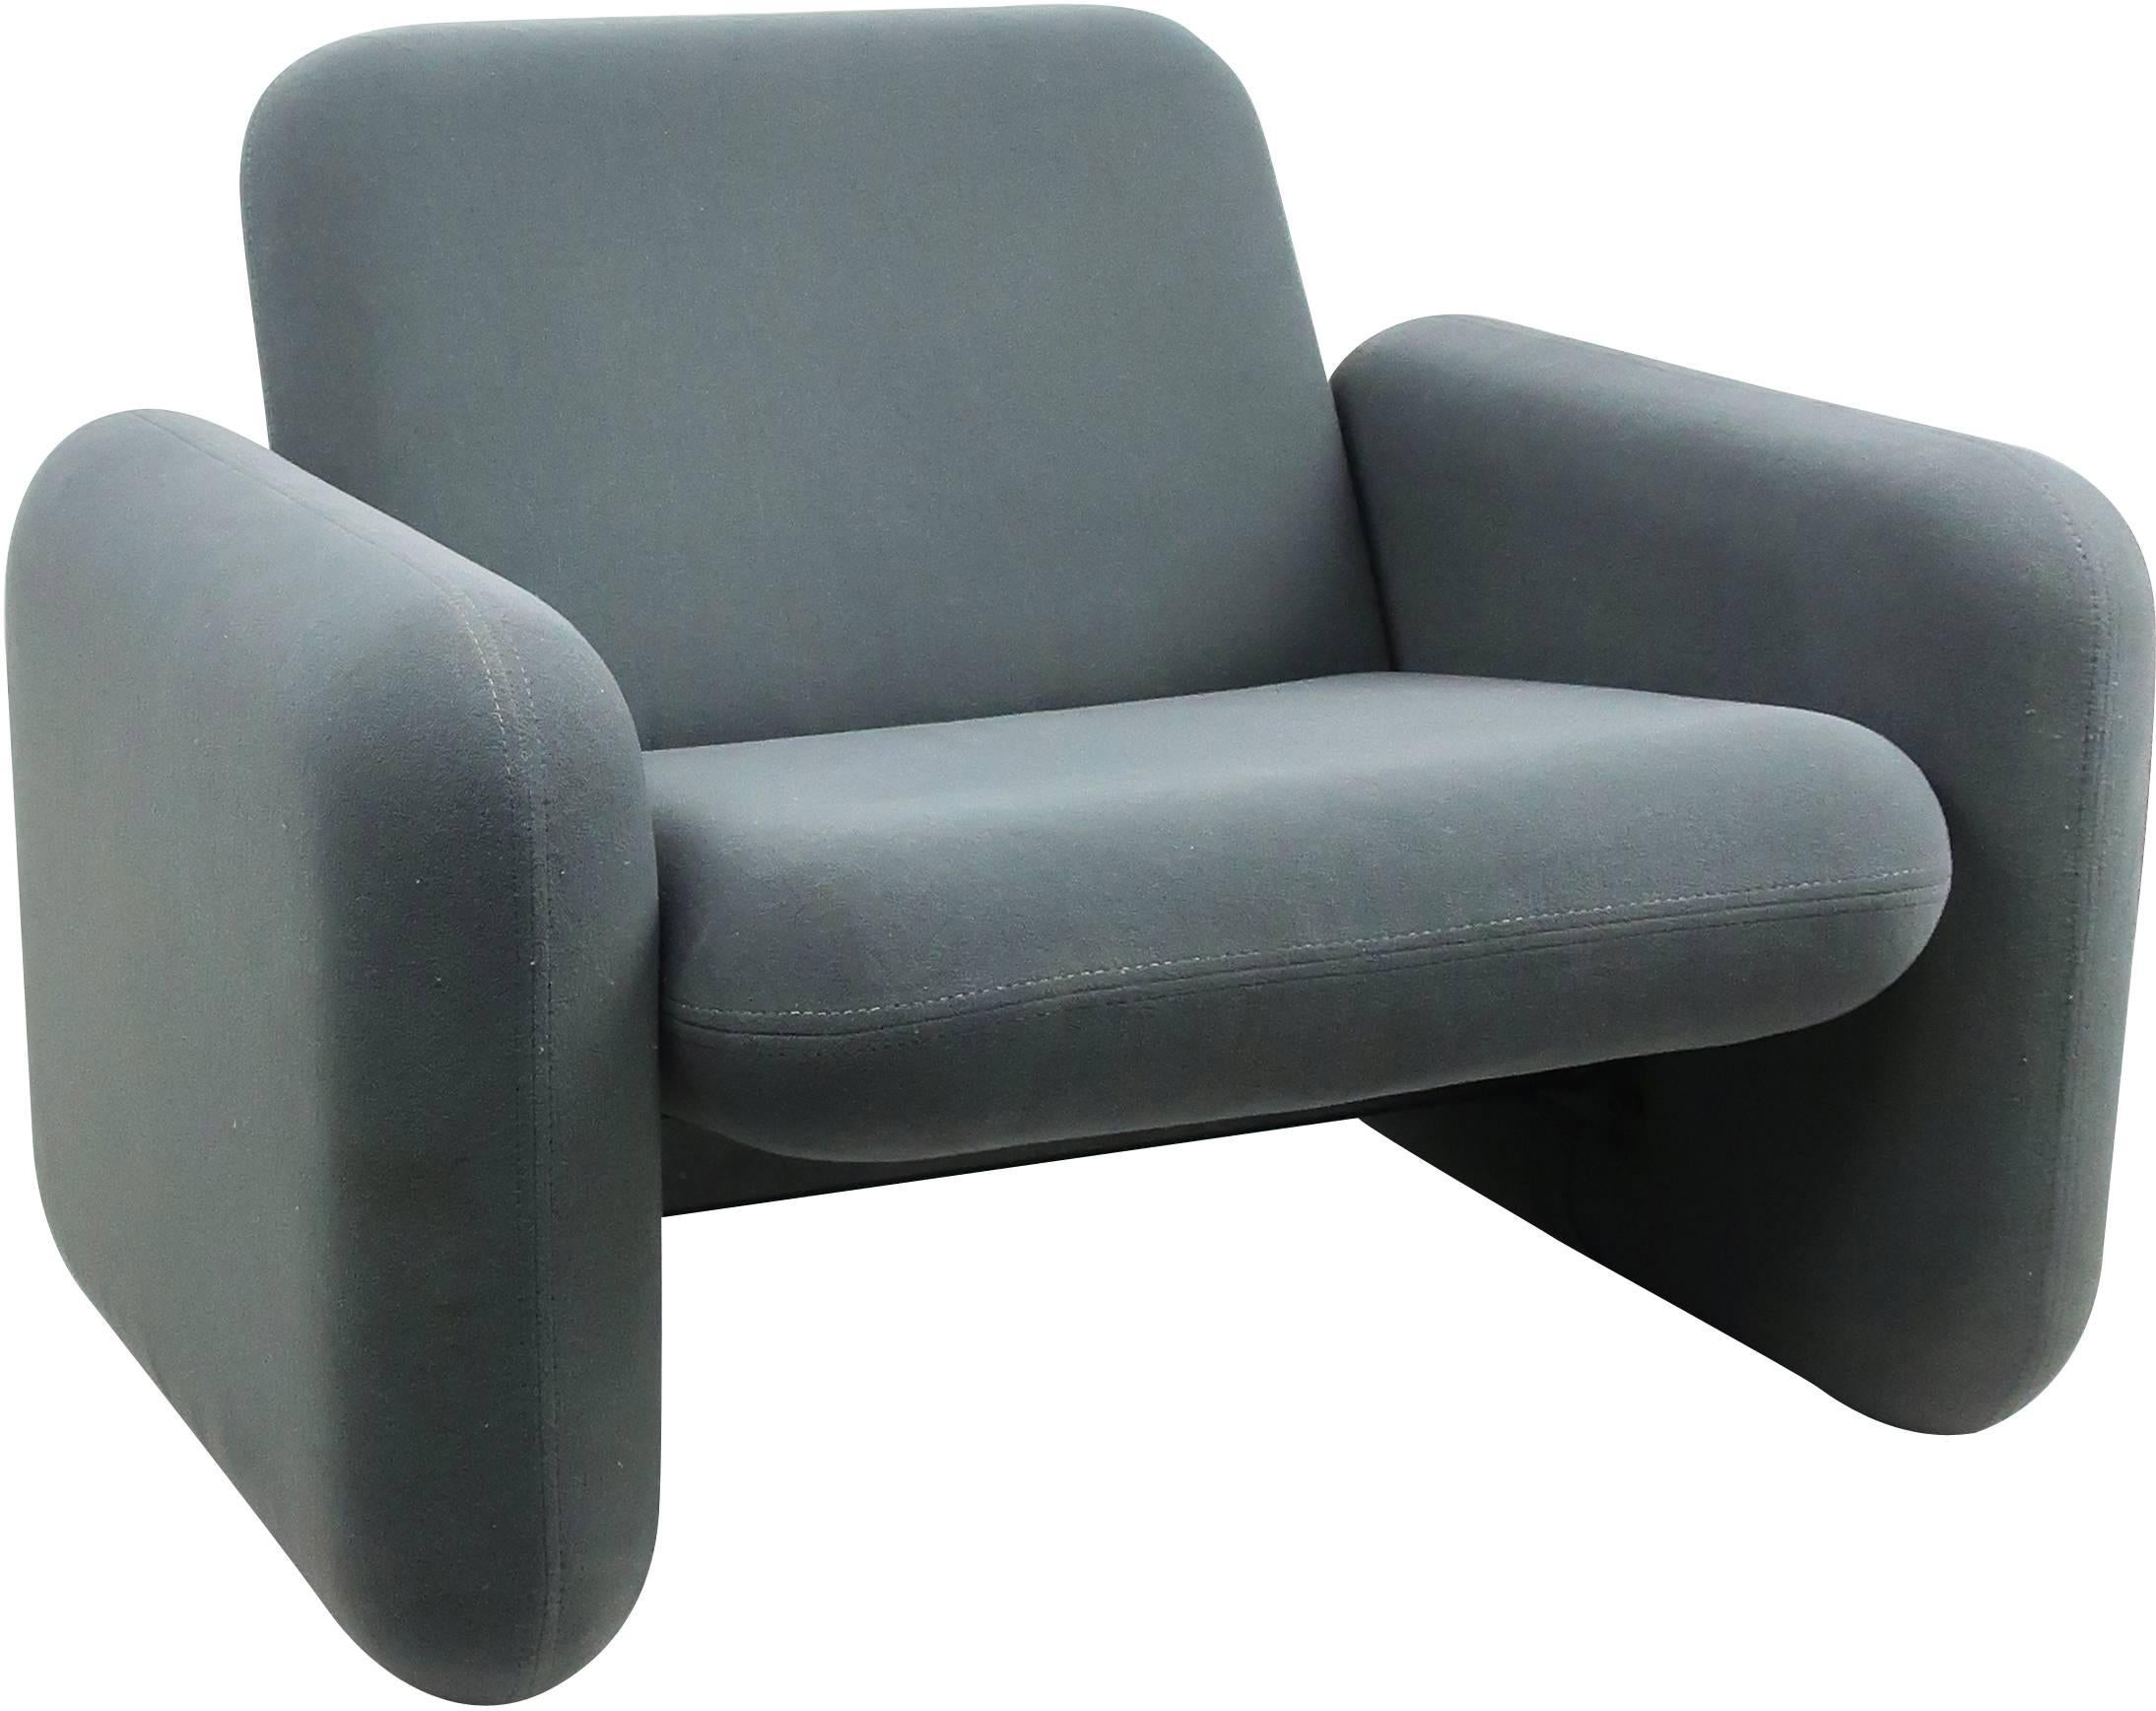 American Chiclet Lounge Chair by Ray Wilkes for Herman Mille